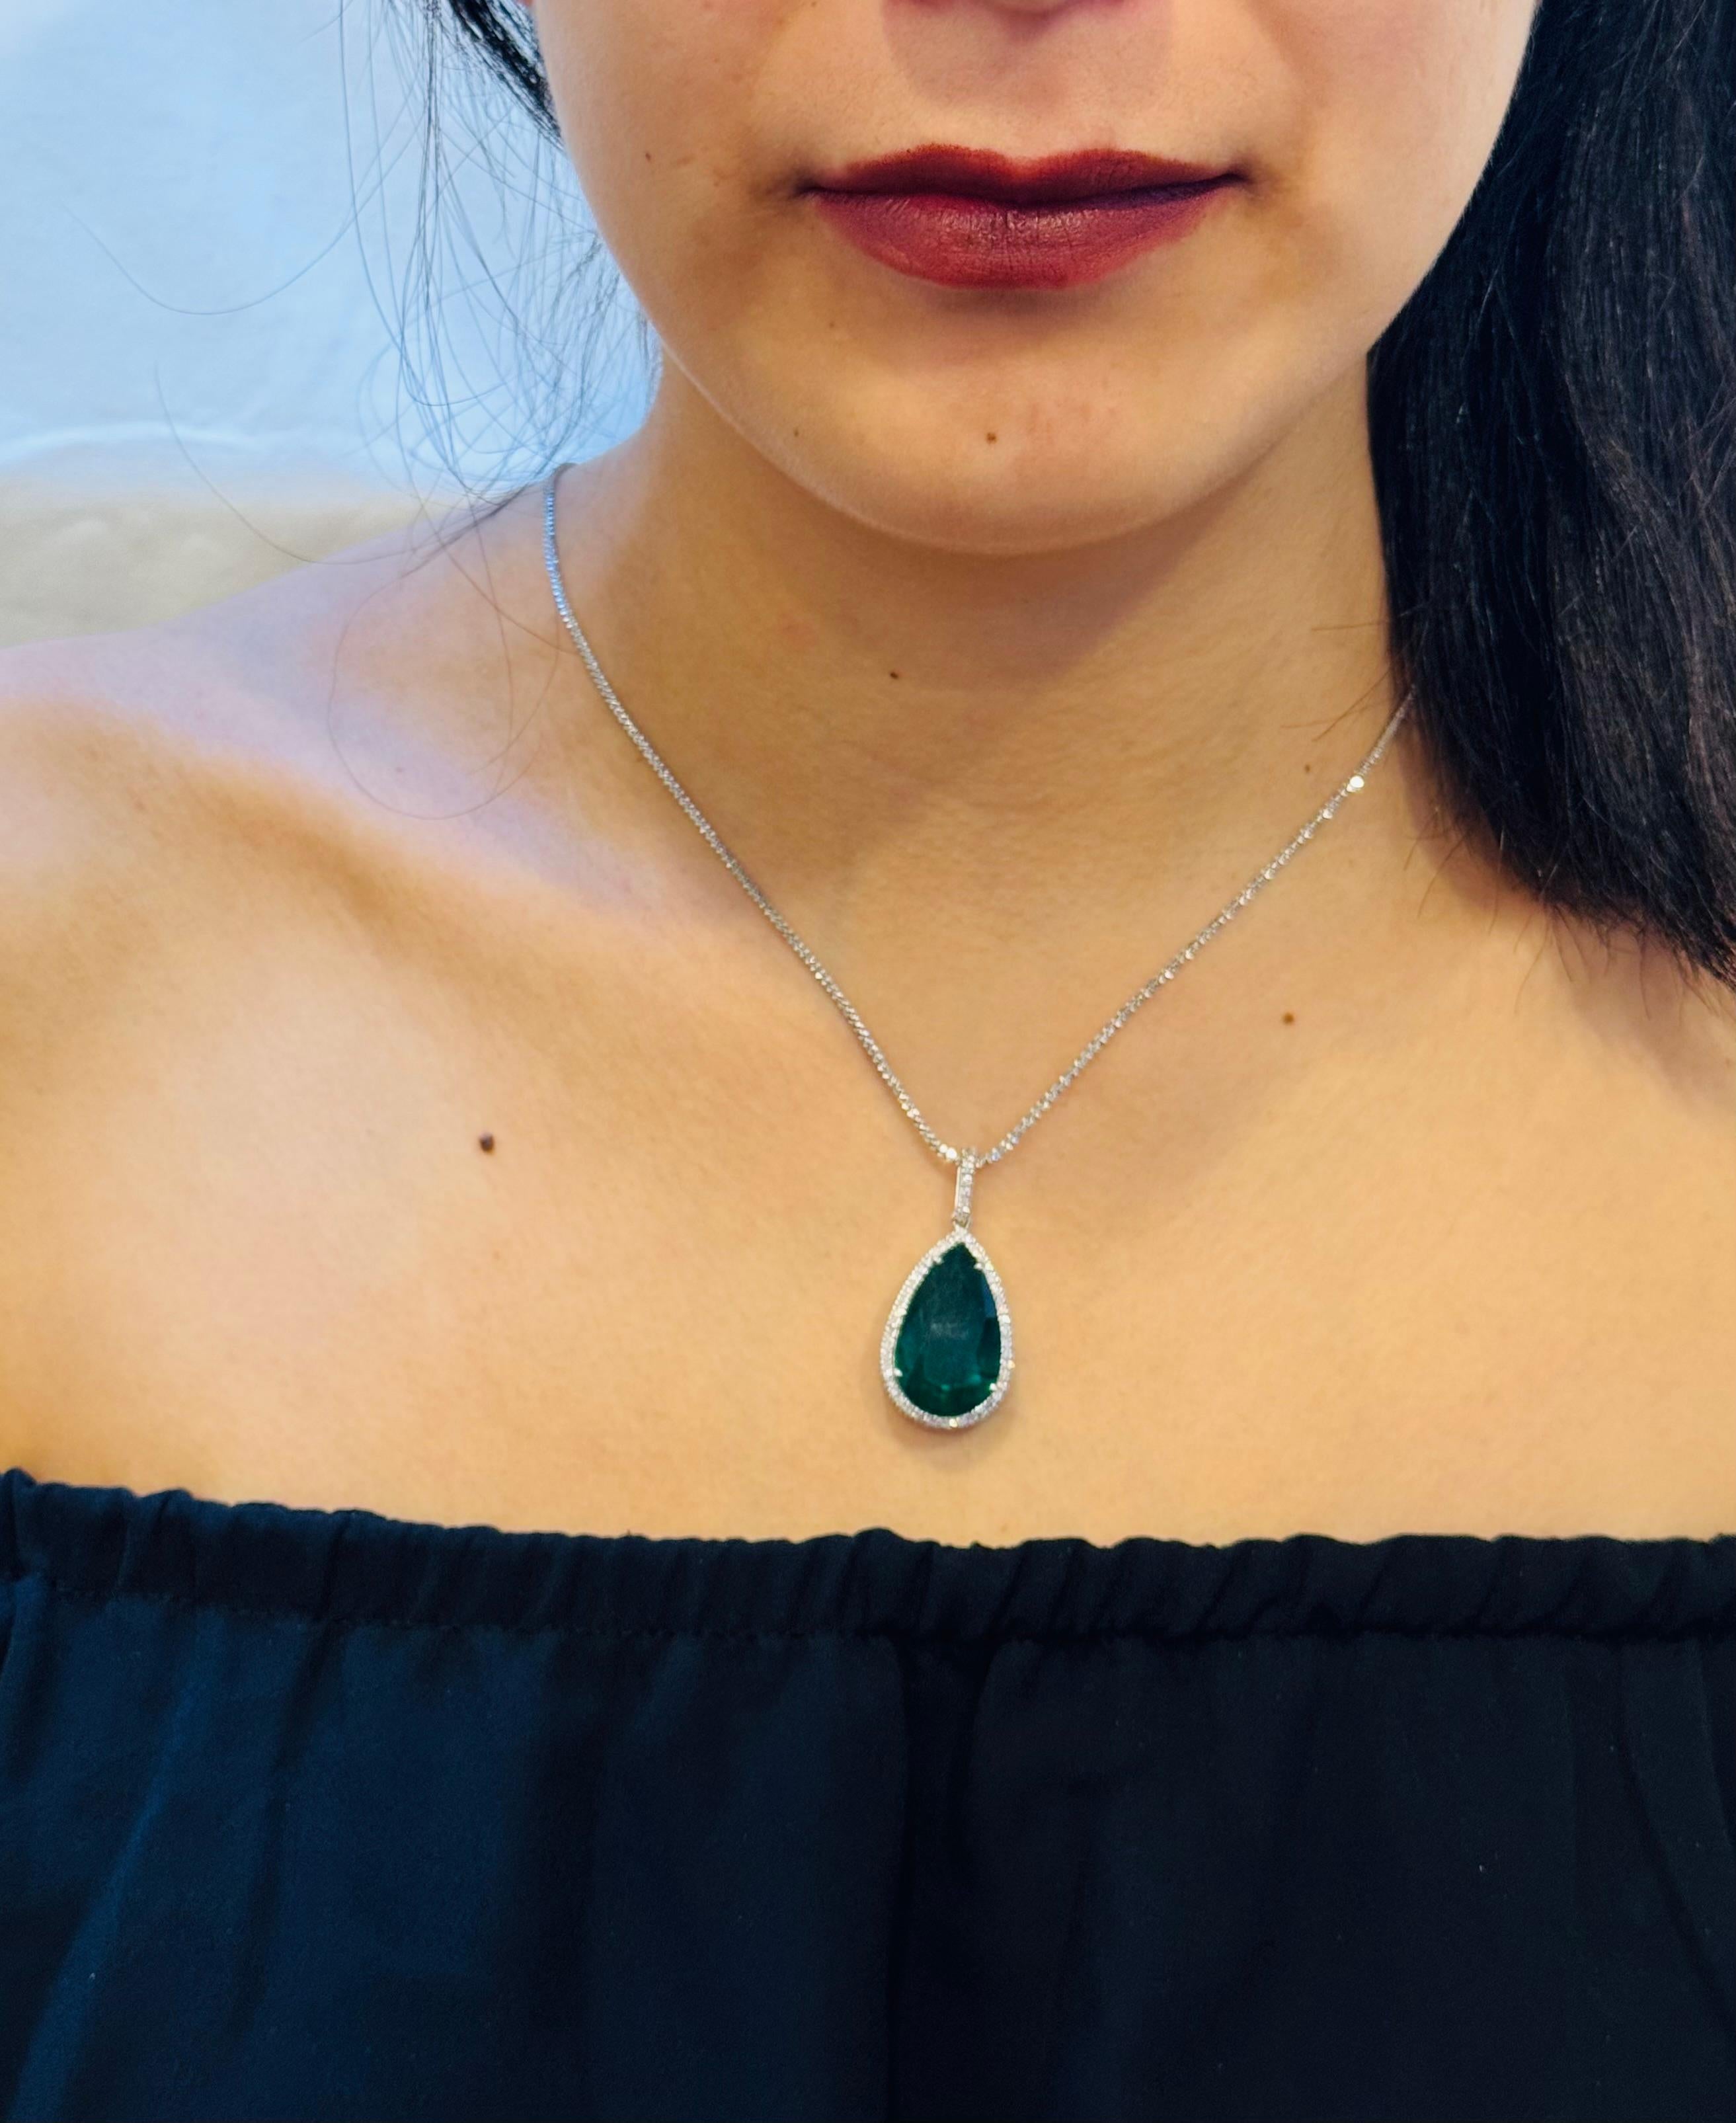 19 Ct Pear Cut Emerald & 1 Ct Diamond Halo Pendent/Necklace 14 KW Gold Chain For Sale 15